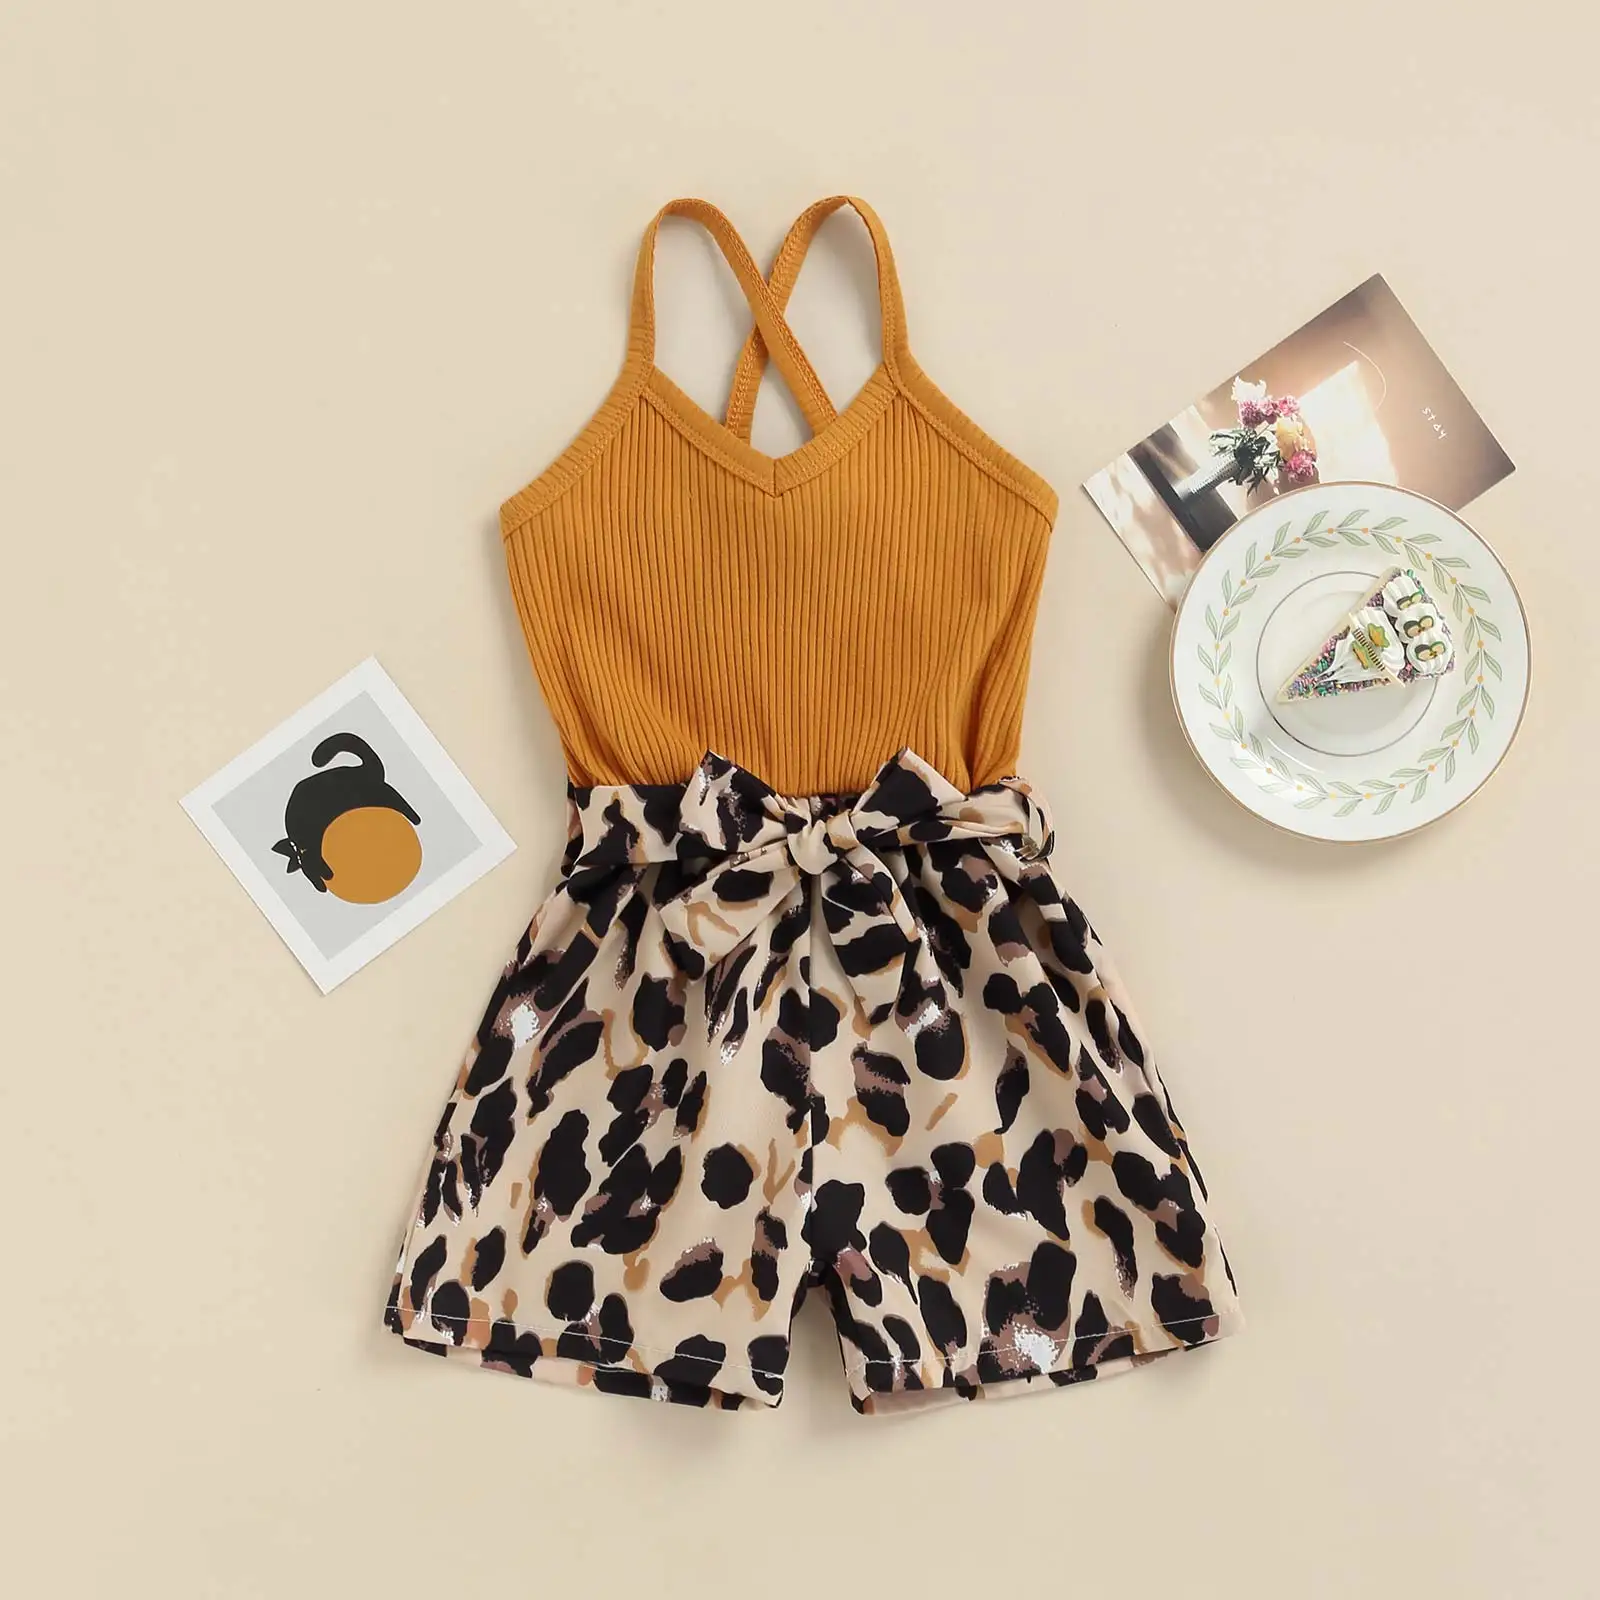 Baby Bodysuits Fur Lioraitiin 1-6Years Toddler Baby Girl Summer Romper Sleeveless Solid Patchwork Leopard Jumpsuit 4Colors bright baby bodysuits	